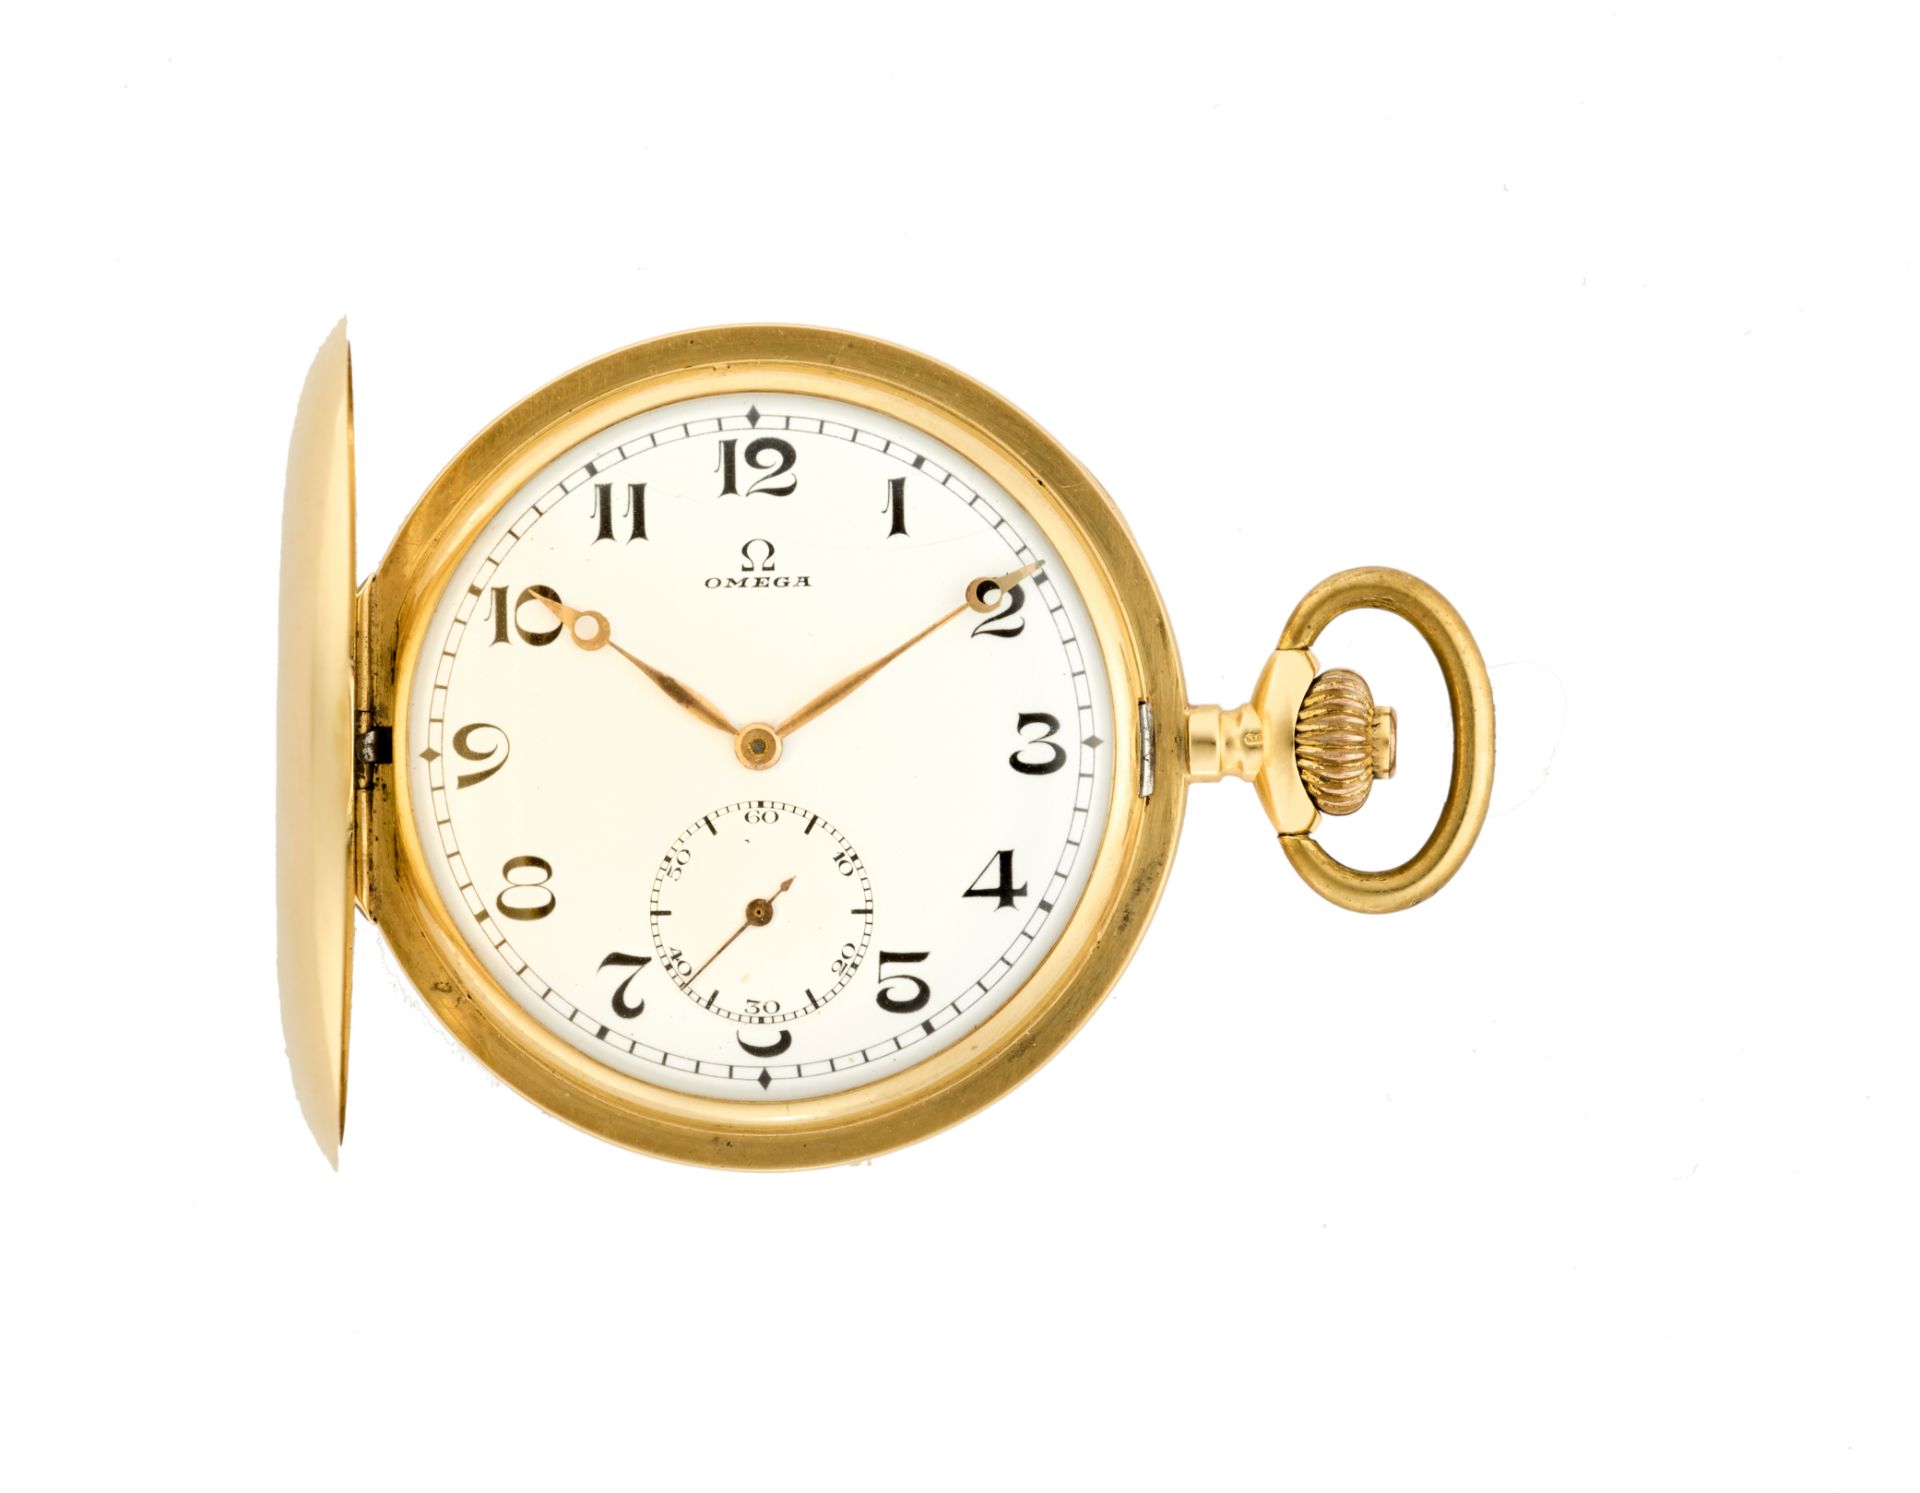 Omega18K gold pocket watch20th centuryDial and movement signedManual wind movementwhite dial with